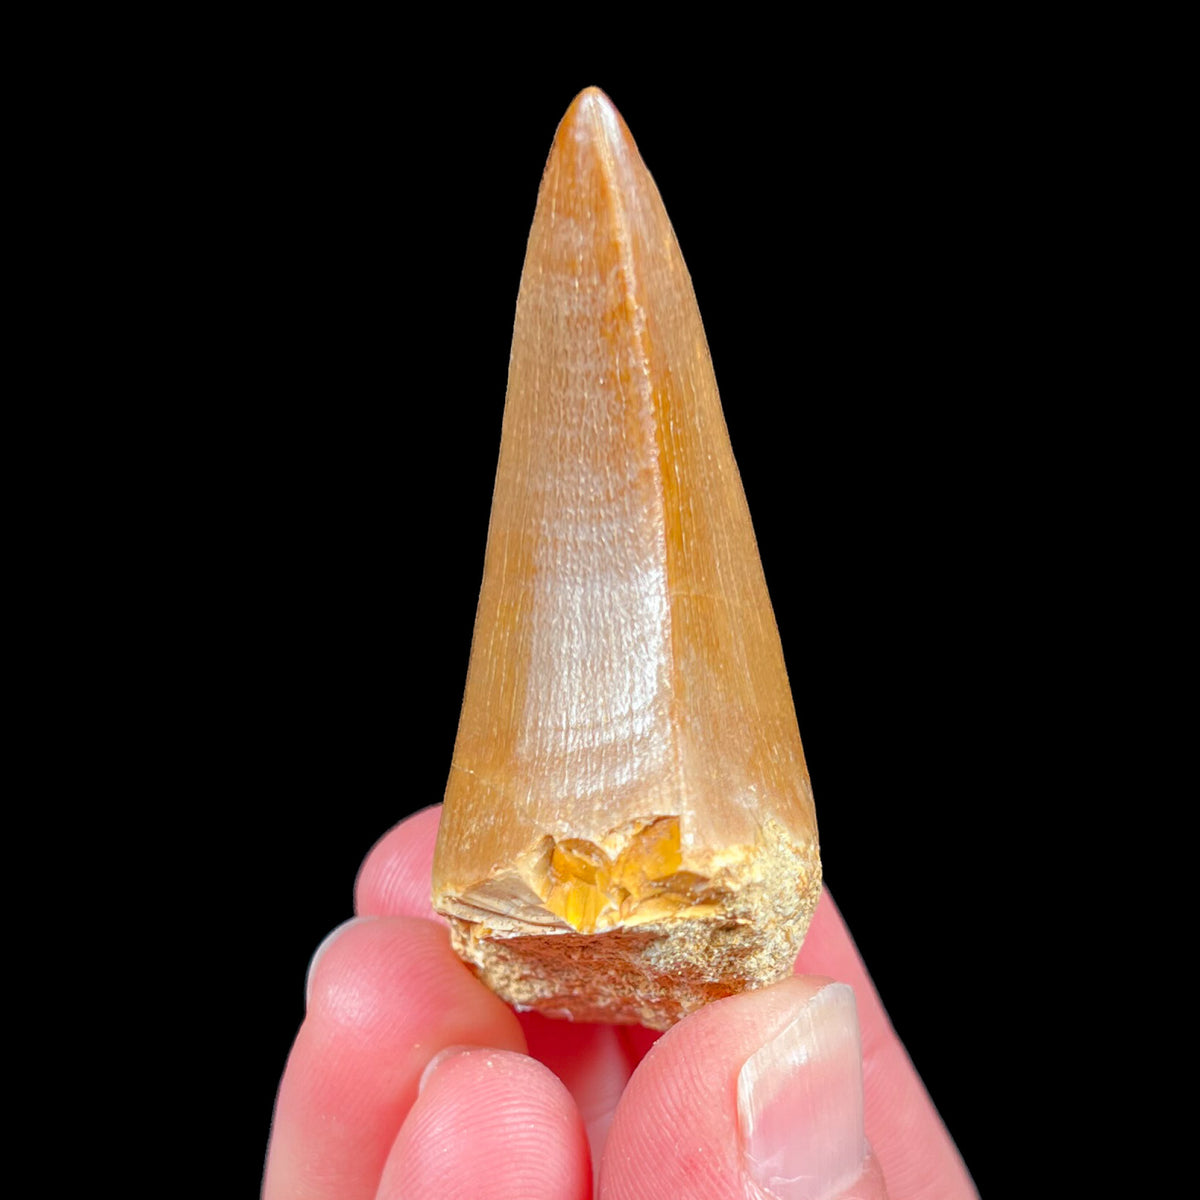 Mosasaurus Tooth Fossil